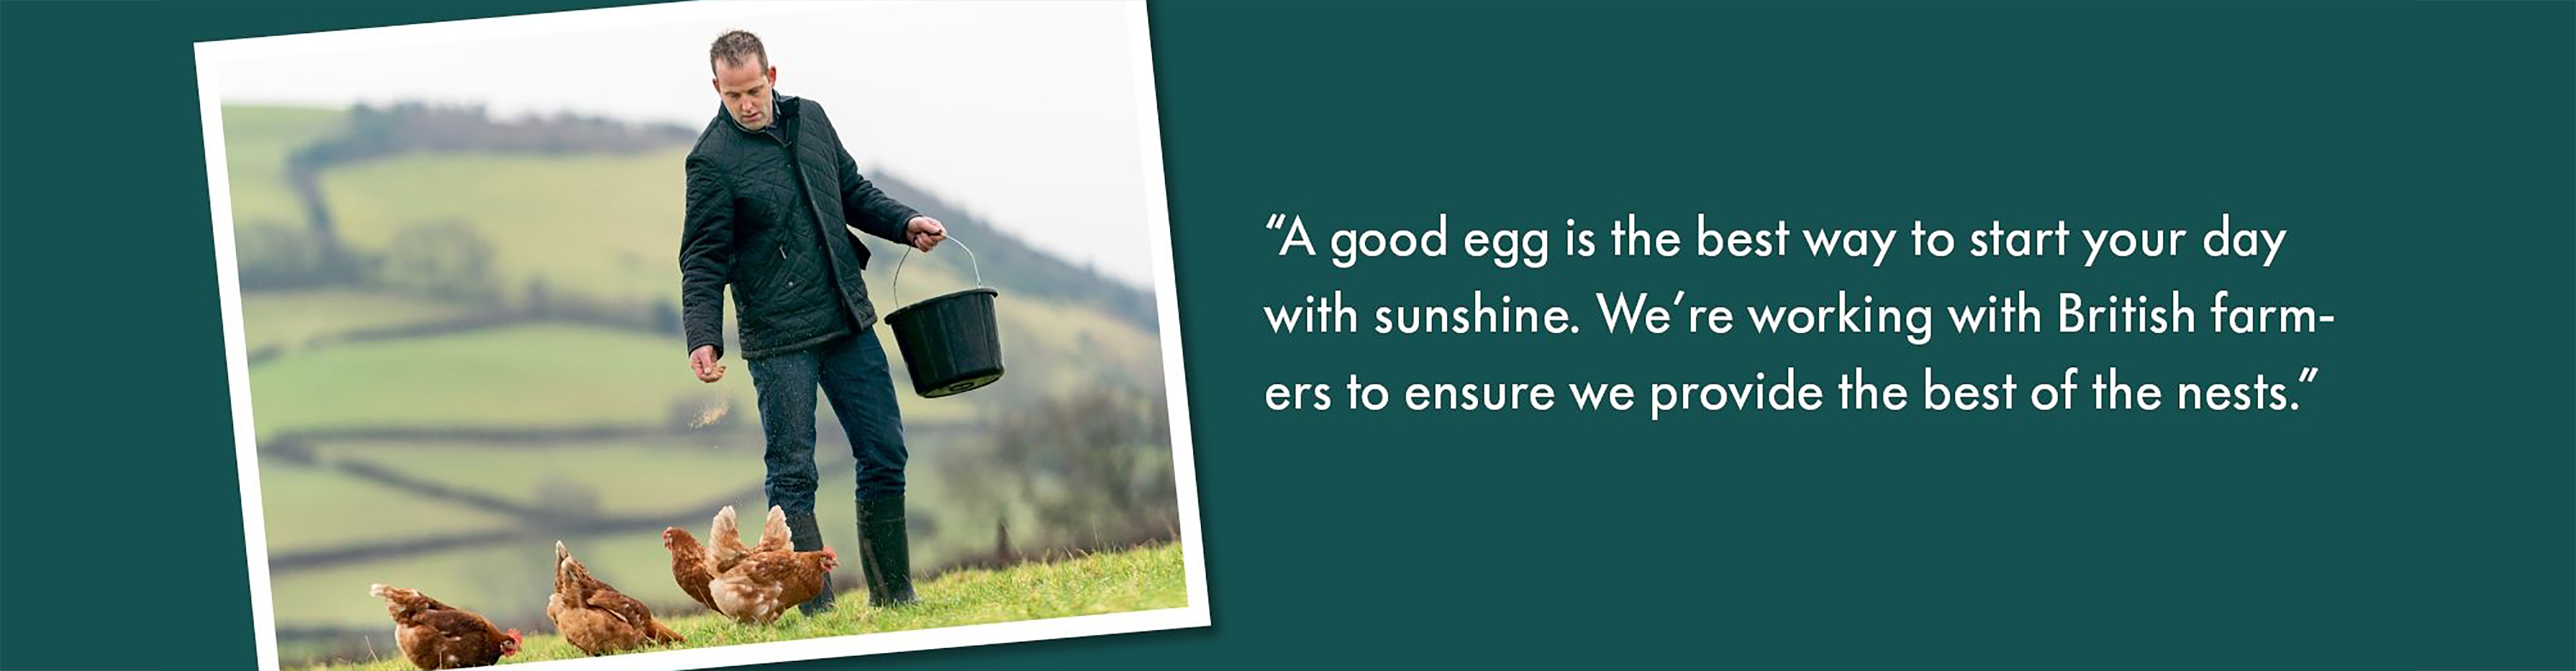 Meet Our Farmer Gareth – and His Happy Hens